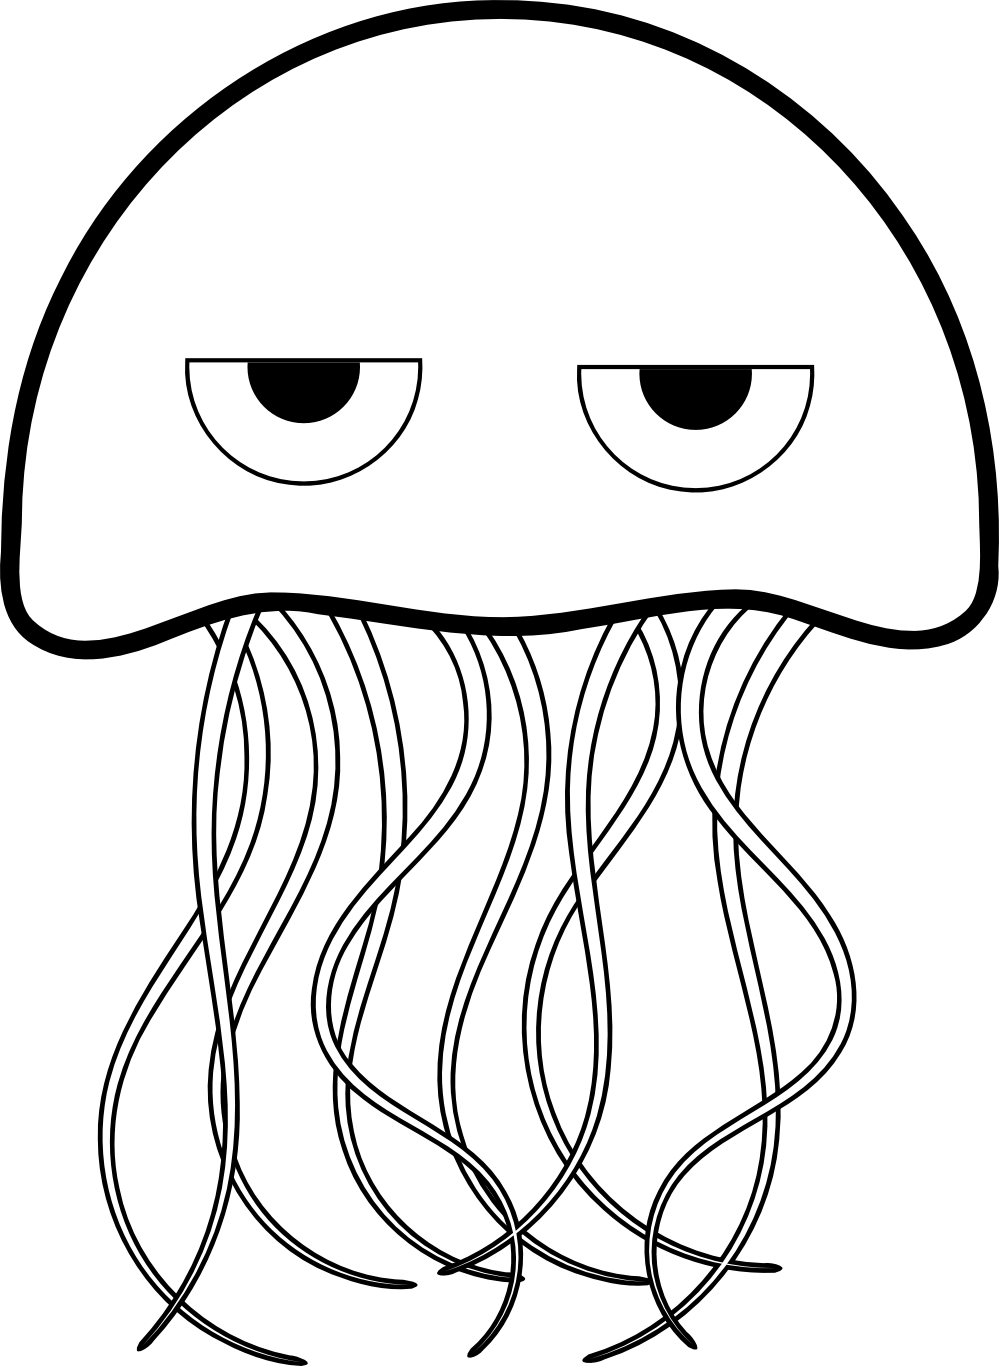 Jellyfish Coloring Pages Printable   ClipArt Best   ClipArt Best